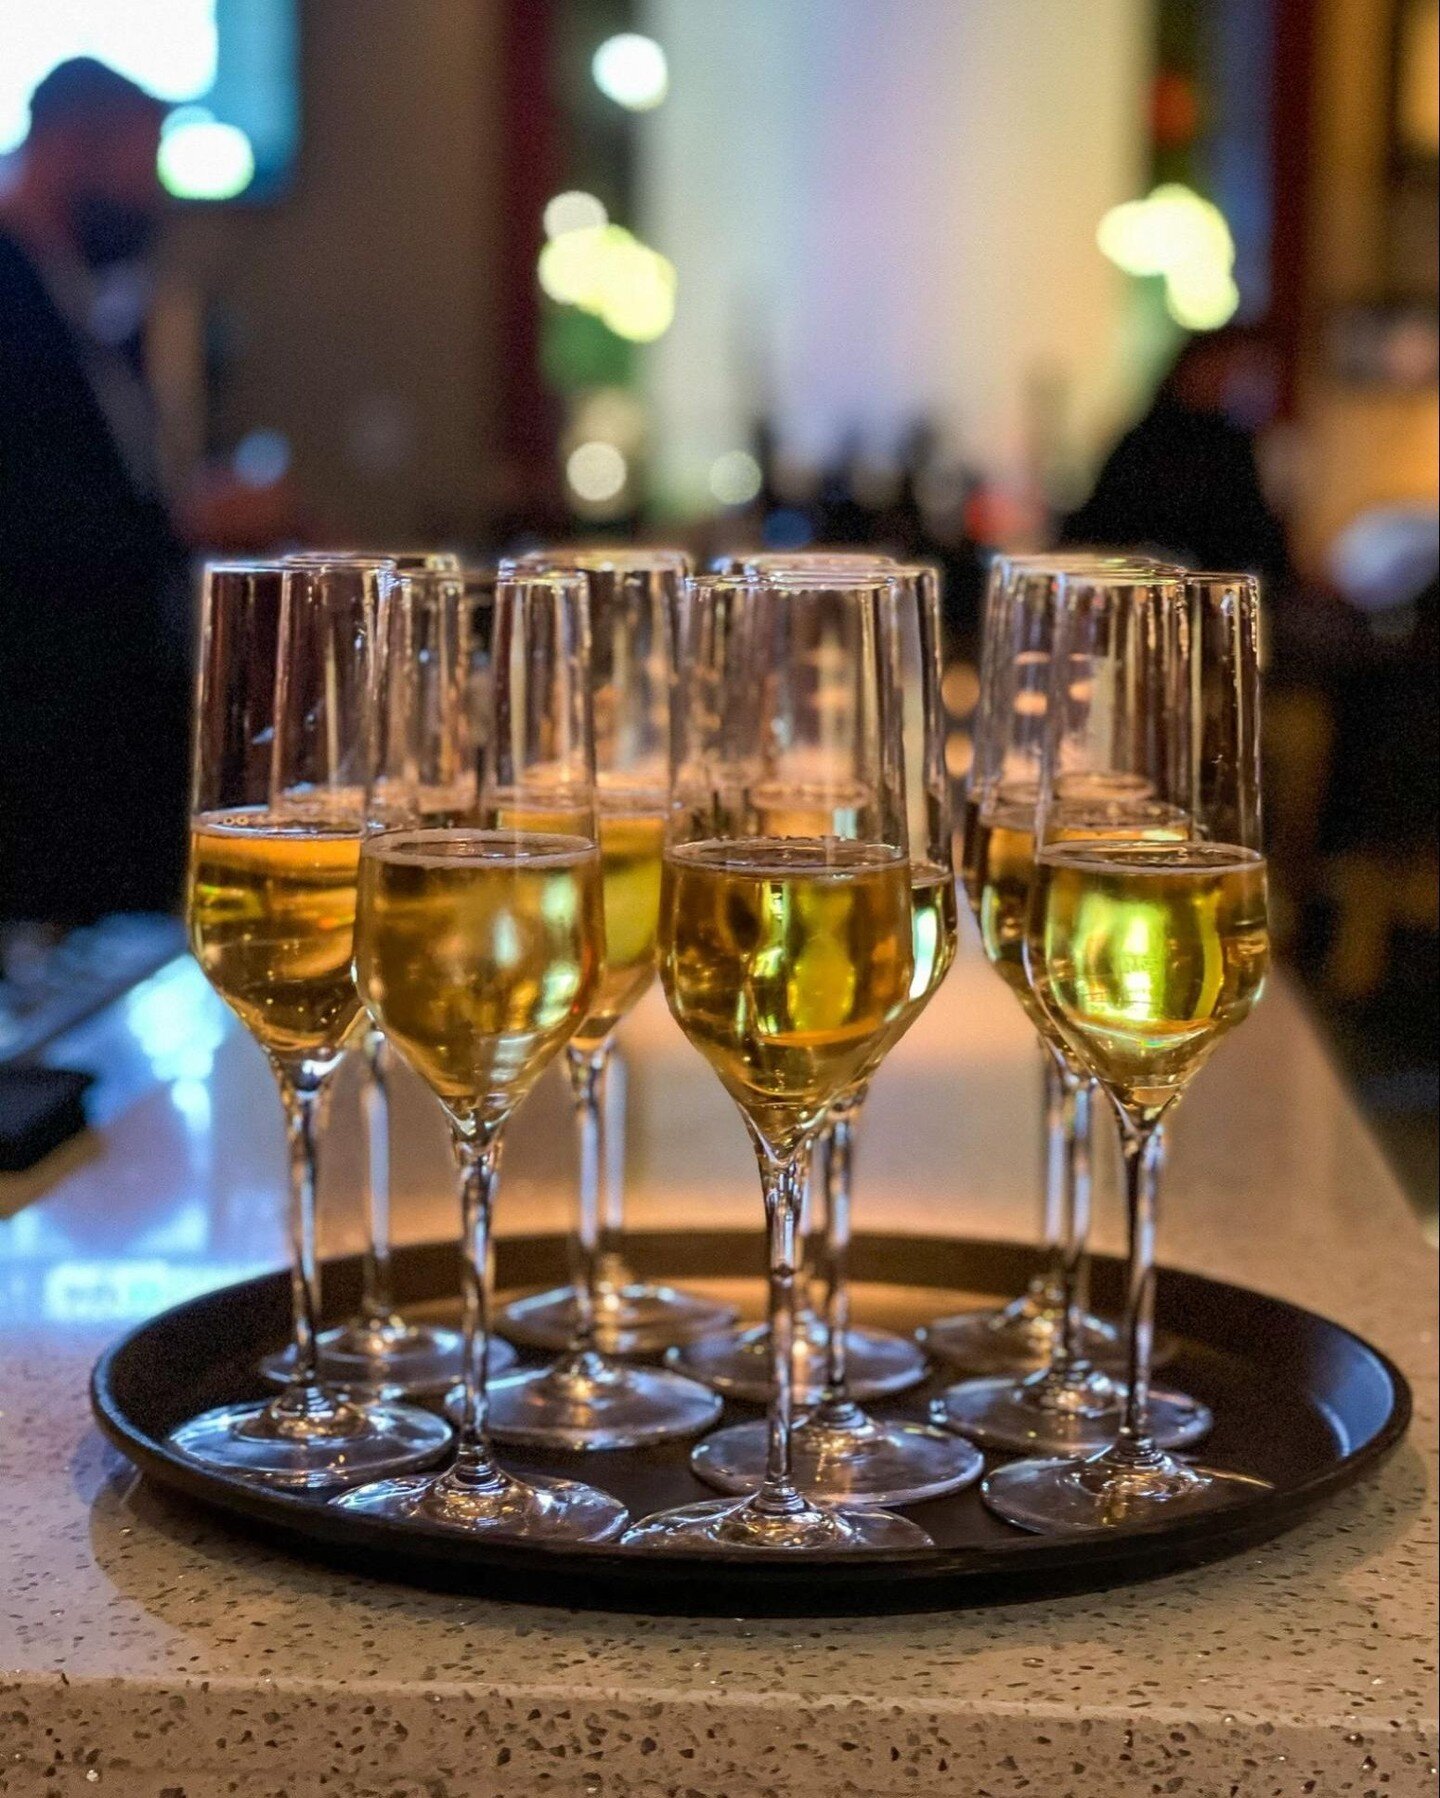 The official champagne campaign. Valentine&rsquo;s Day reservations are booking up- RSVP today to cheers to your loved one over a 4 course meal. 

Jasper&rsquo;s will be open from 4-9pm on Monday, February 14th.